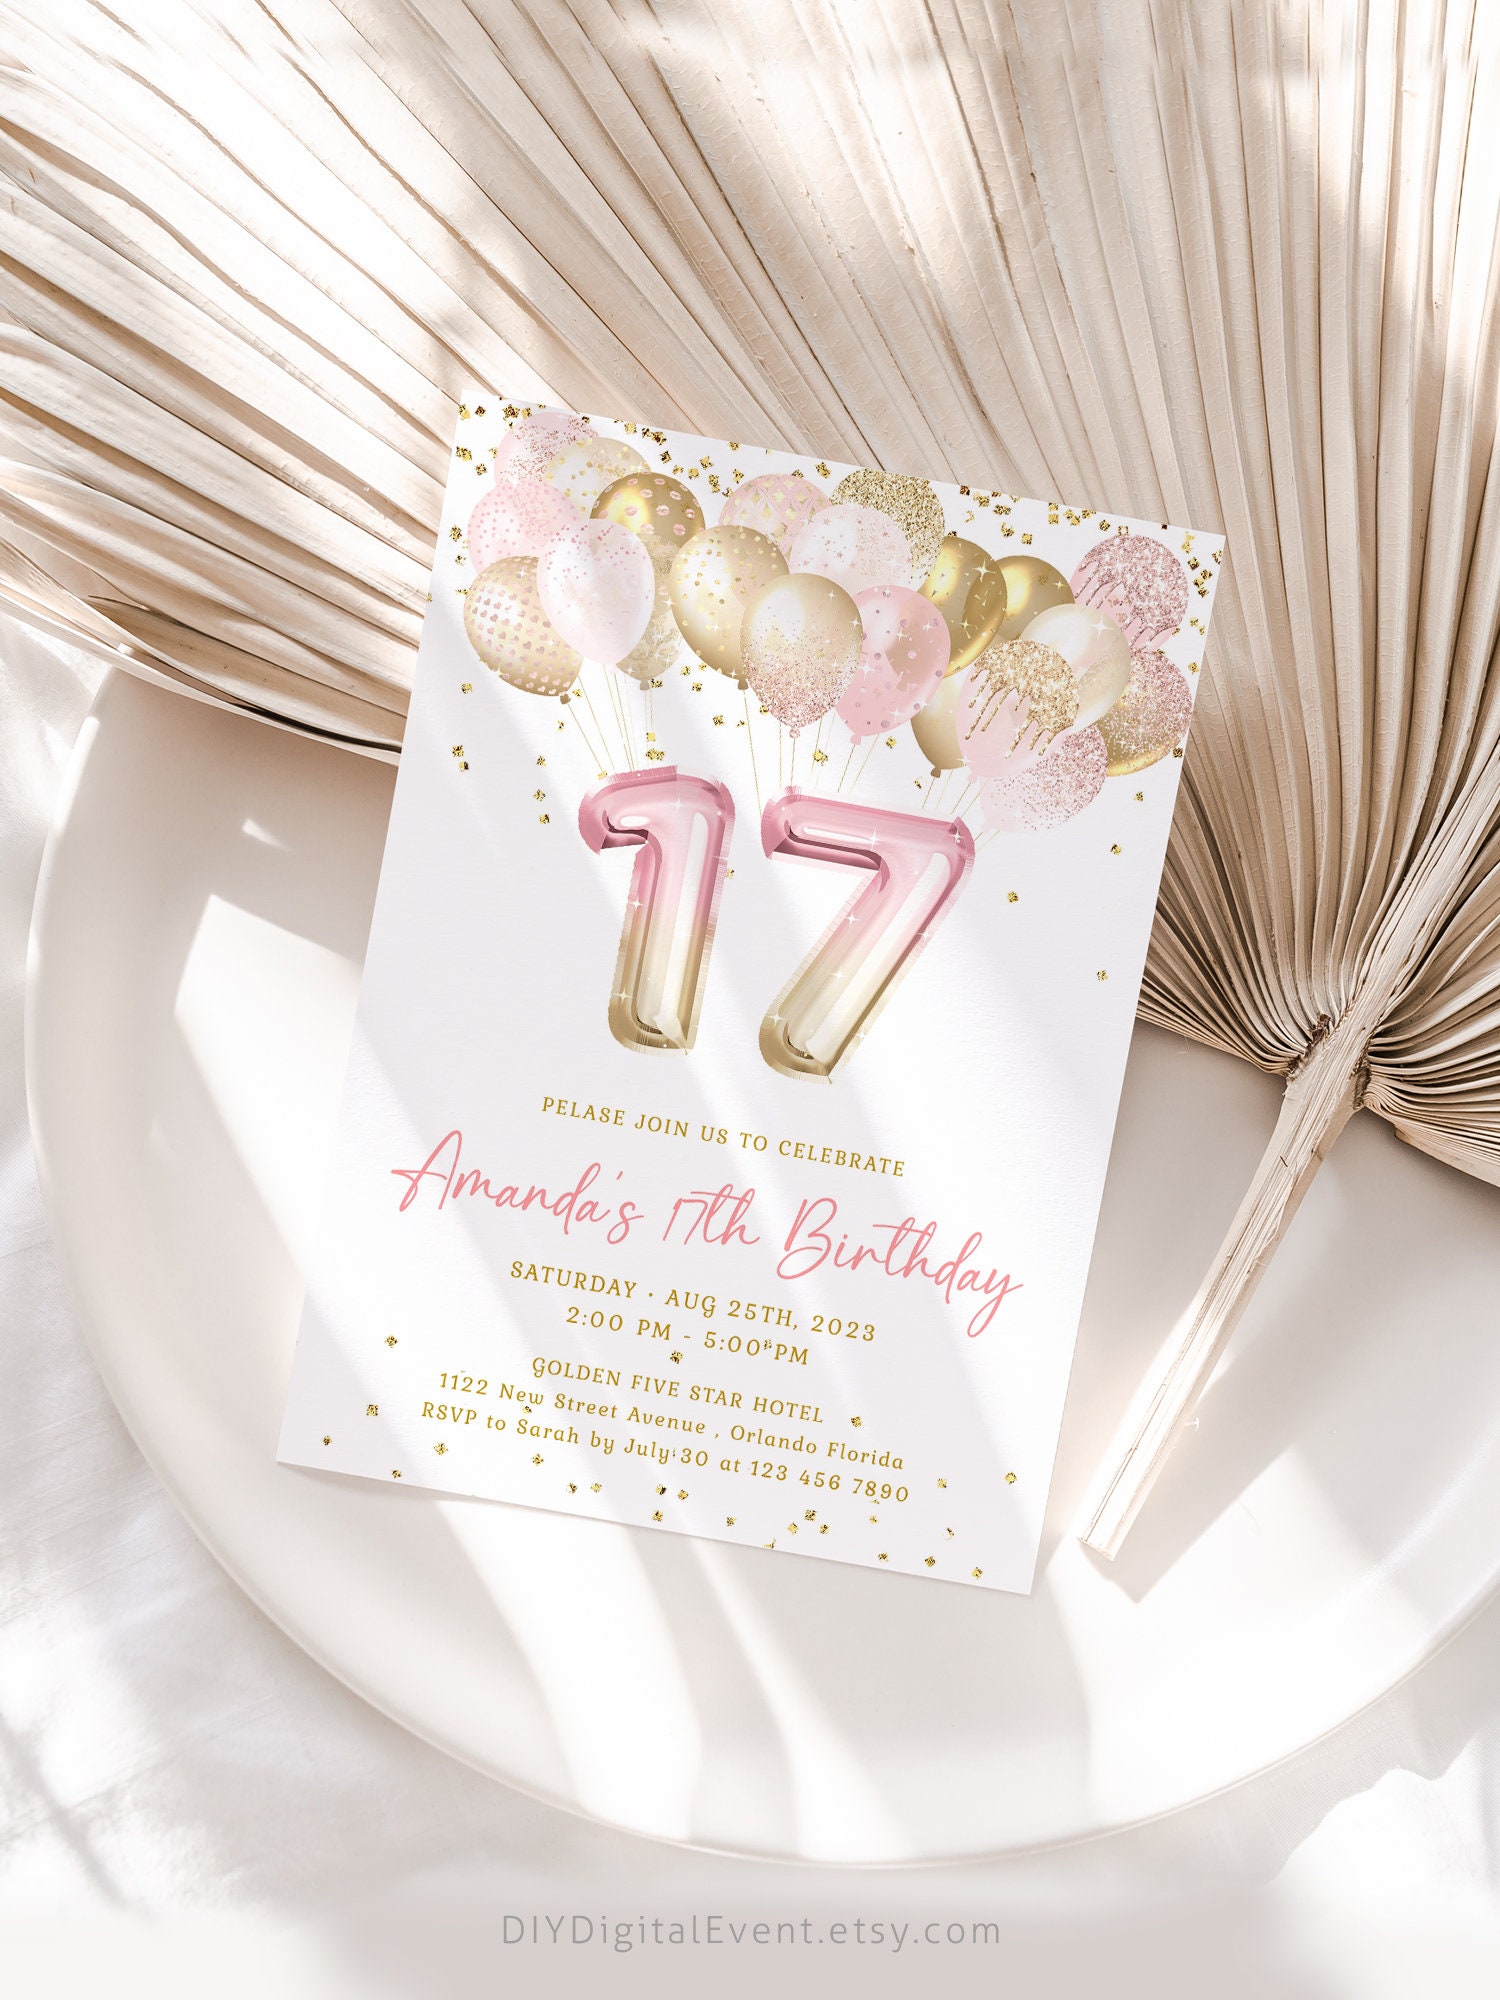 DEBLETEOMH 17th Birthday Decorations for Girls 17 Year Old Girl Gift Ideas Gifts for 17 Year Old Girl 17 Birthday Decorations for Girls 17th